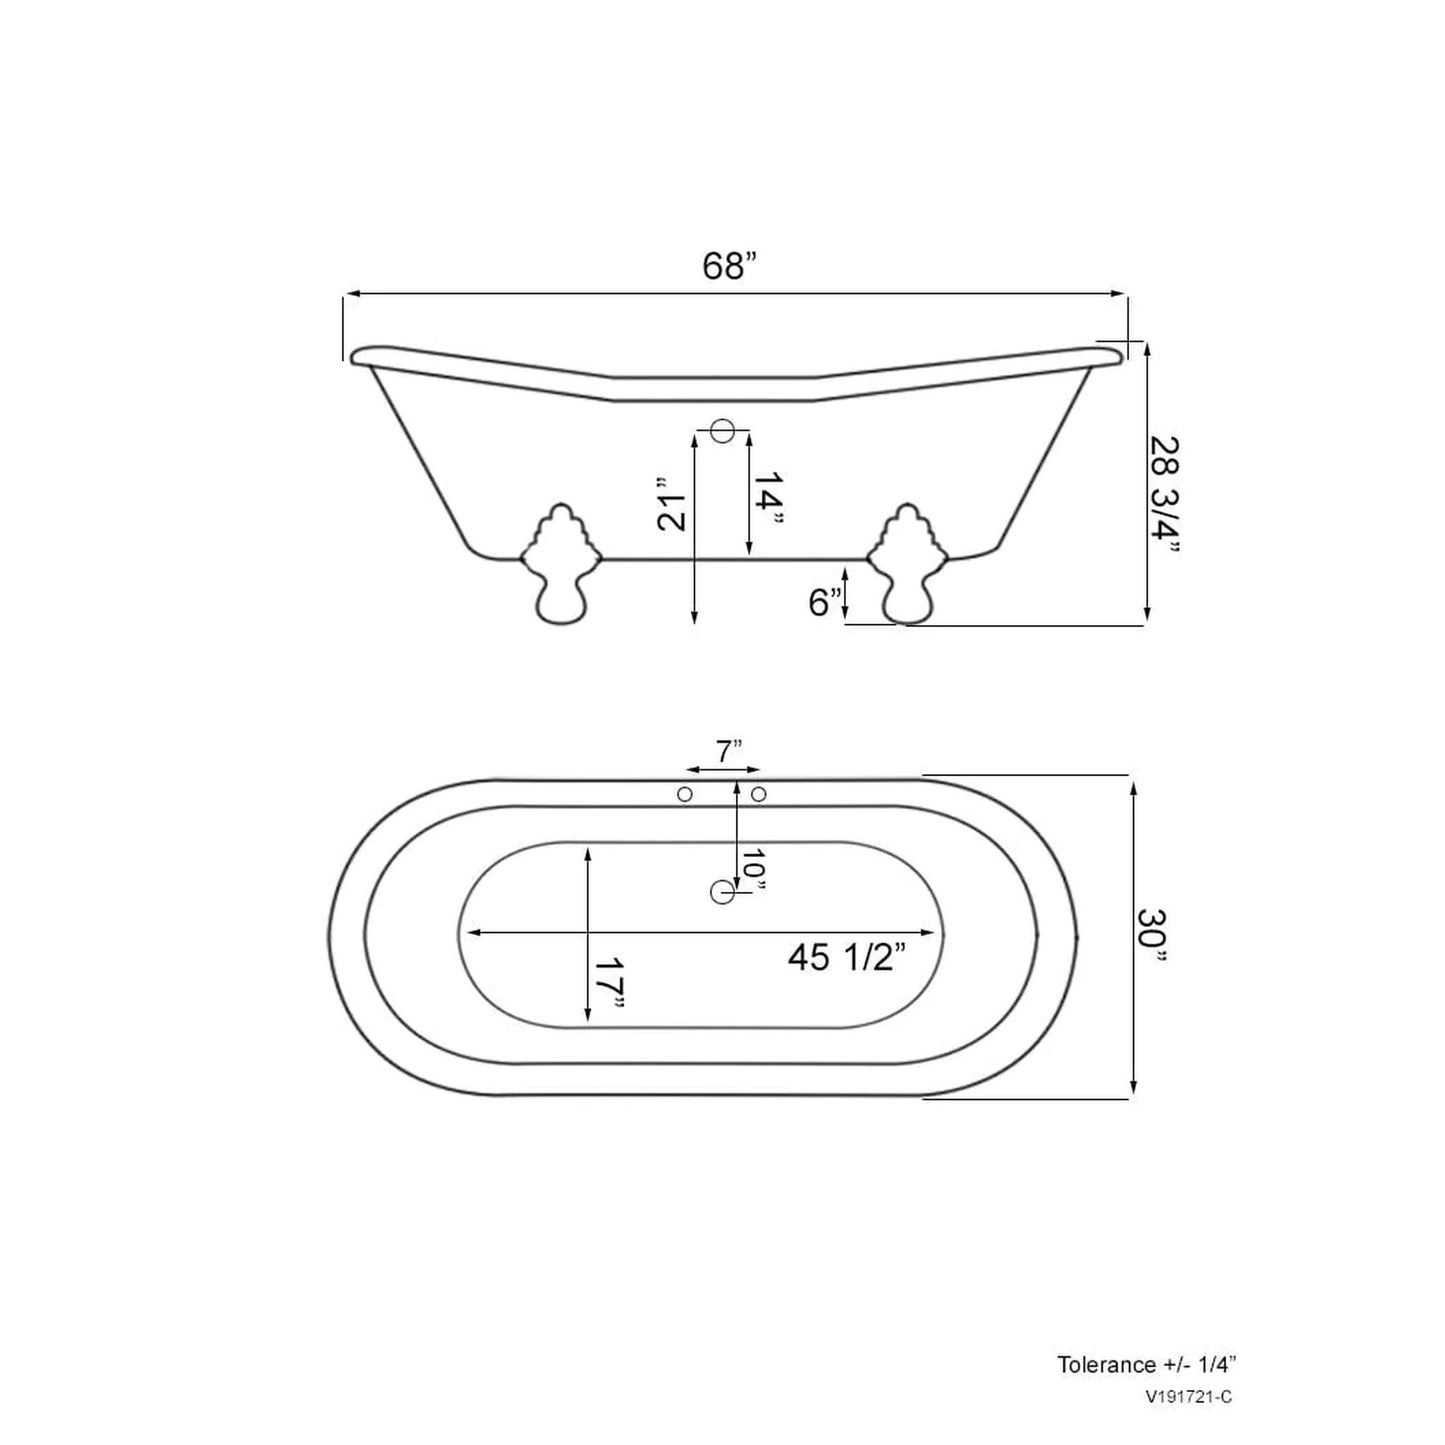 Cambridge Plumbing Amber Waves 68" Gloss White Acrylic Double Slipper Clawfoot Bathtub With Deck Holes And Brushed Nickel Clawfeet